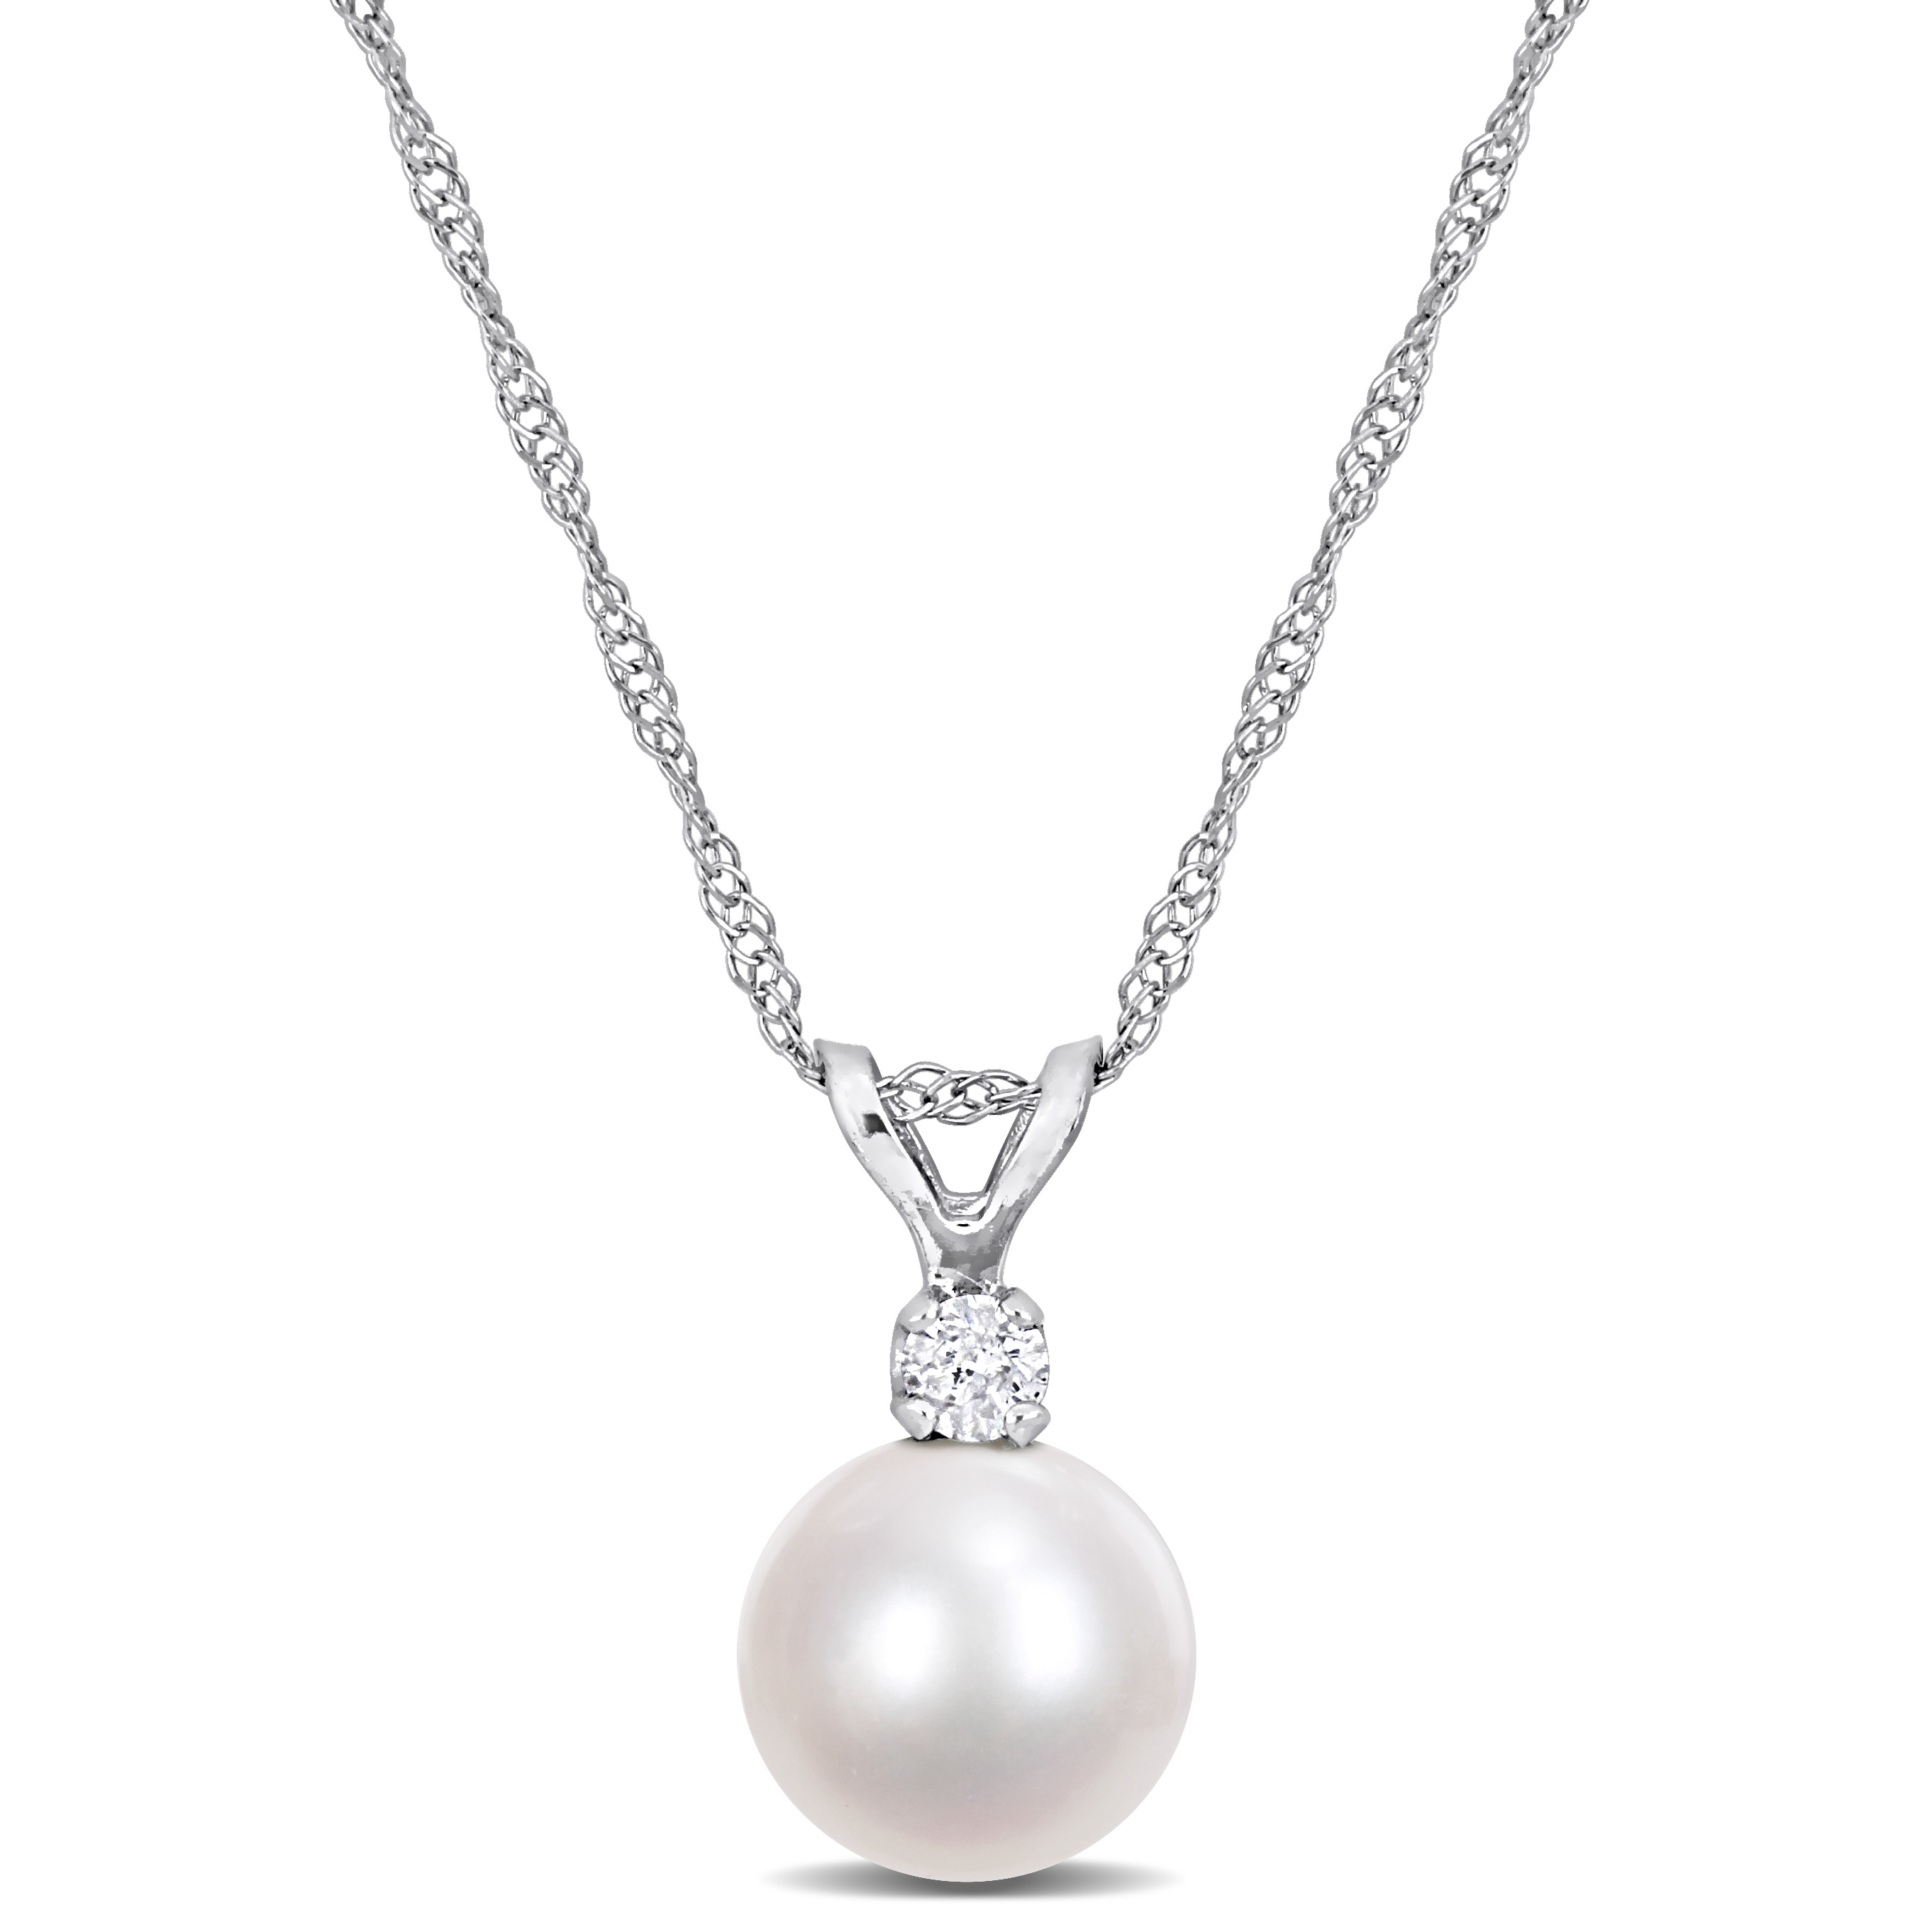 7 - 7.5 MM White Cultured Freshwater Pearl and Diamond Pendant With Chain in 14k Gold White